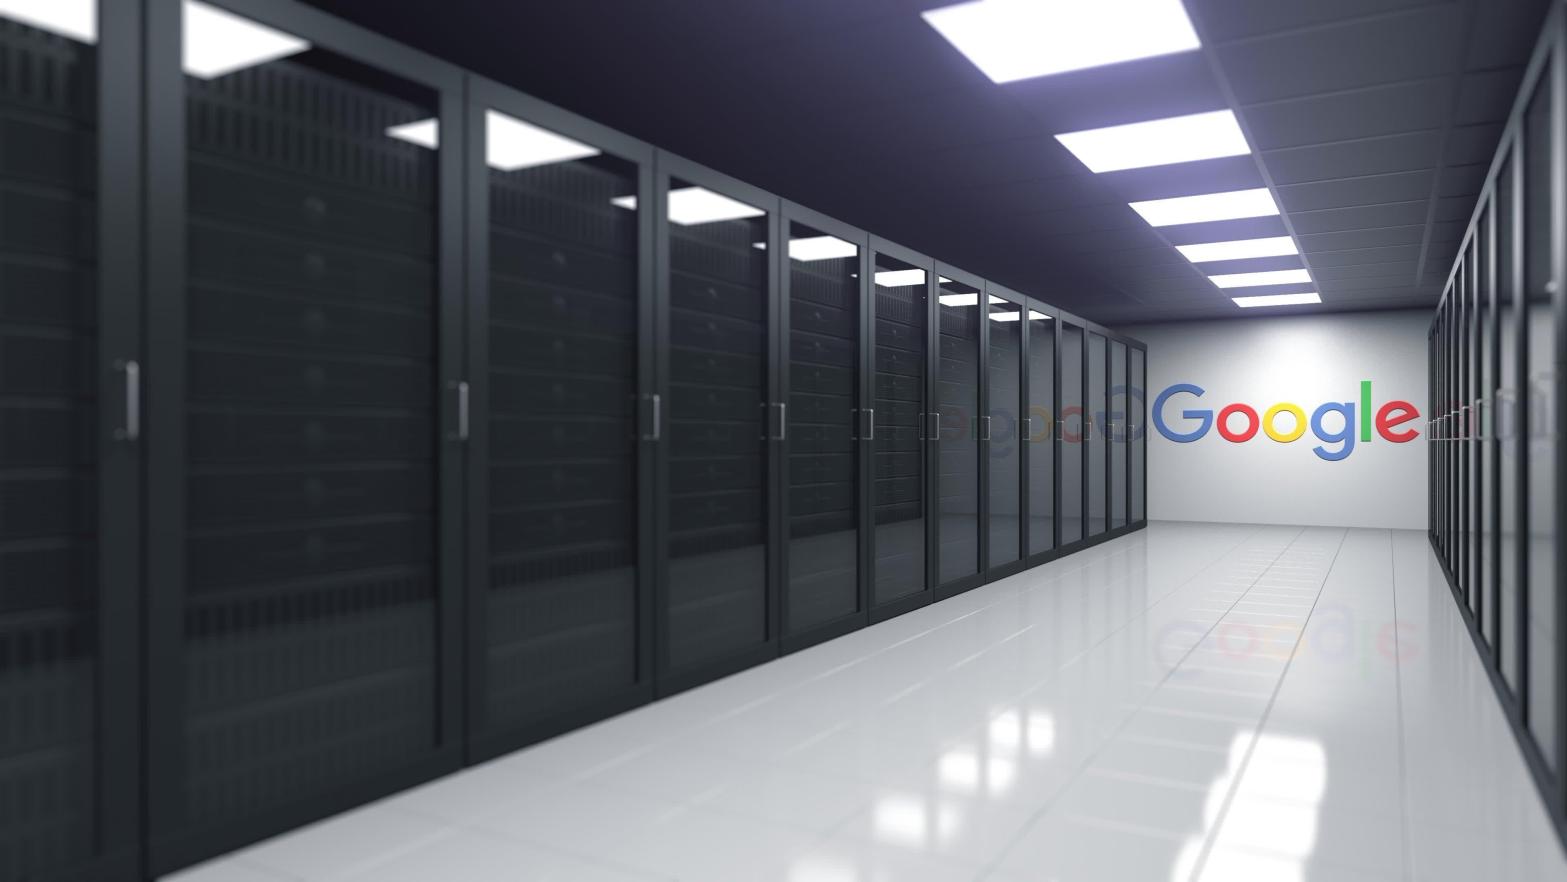 Note: this is just a graphic rendering of a Google server room. We expect the real thing would have Google's logo posted on every floor and ceiling tile as well. (Illustration: Novikov Aleksey, Shutterstock)